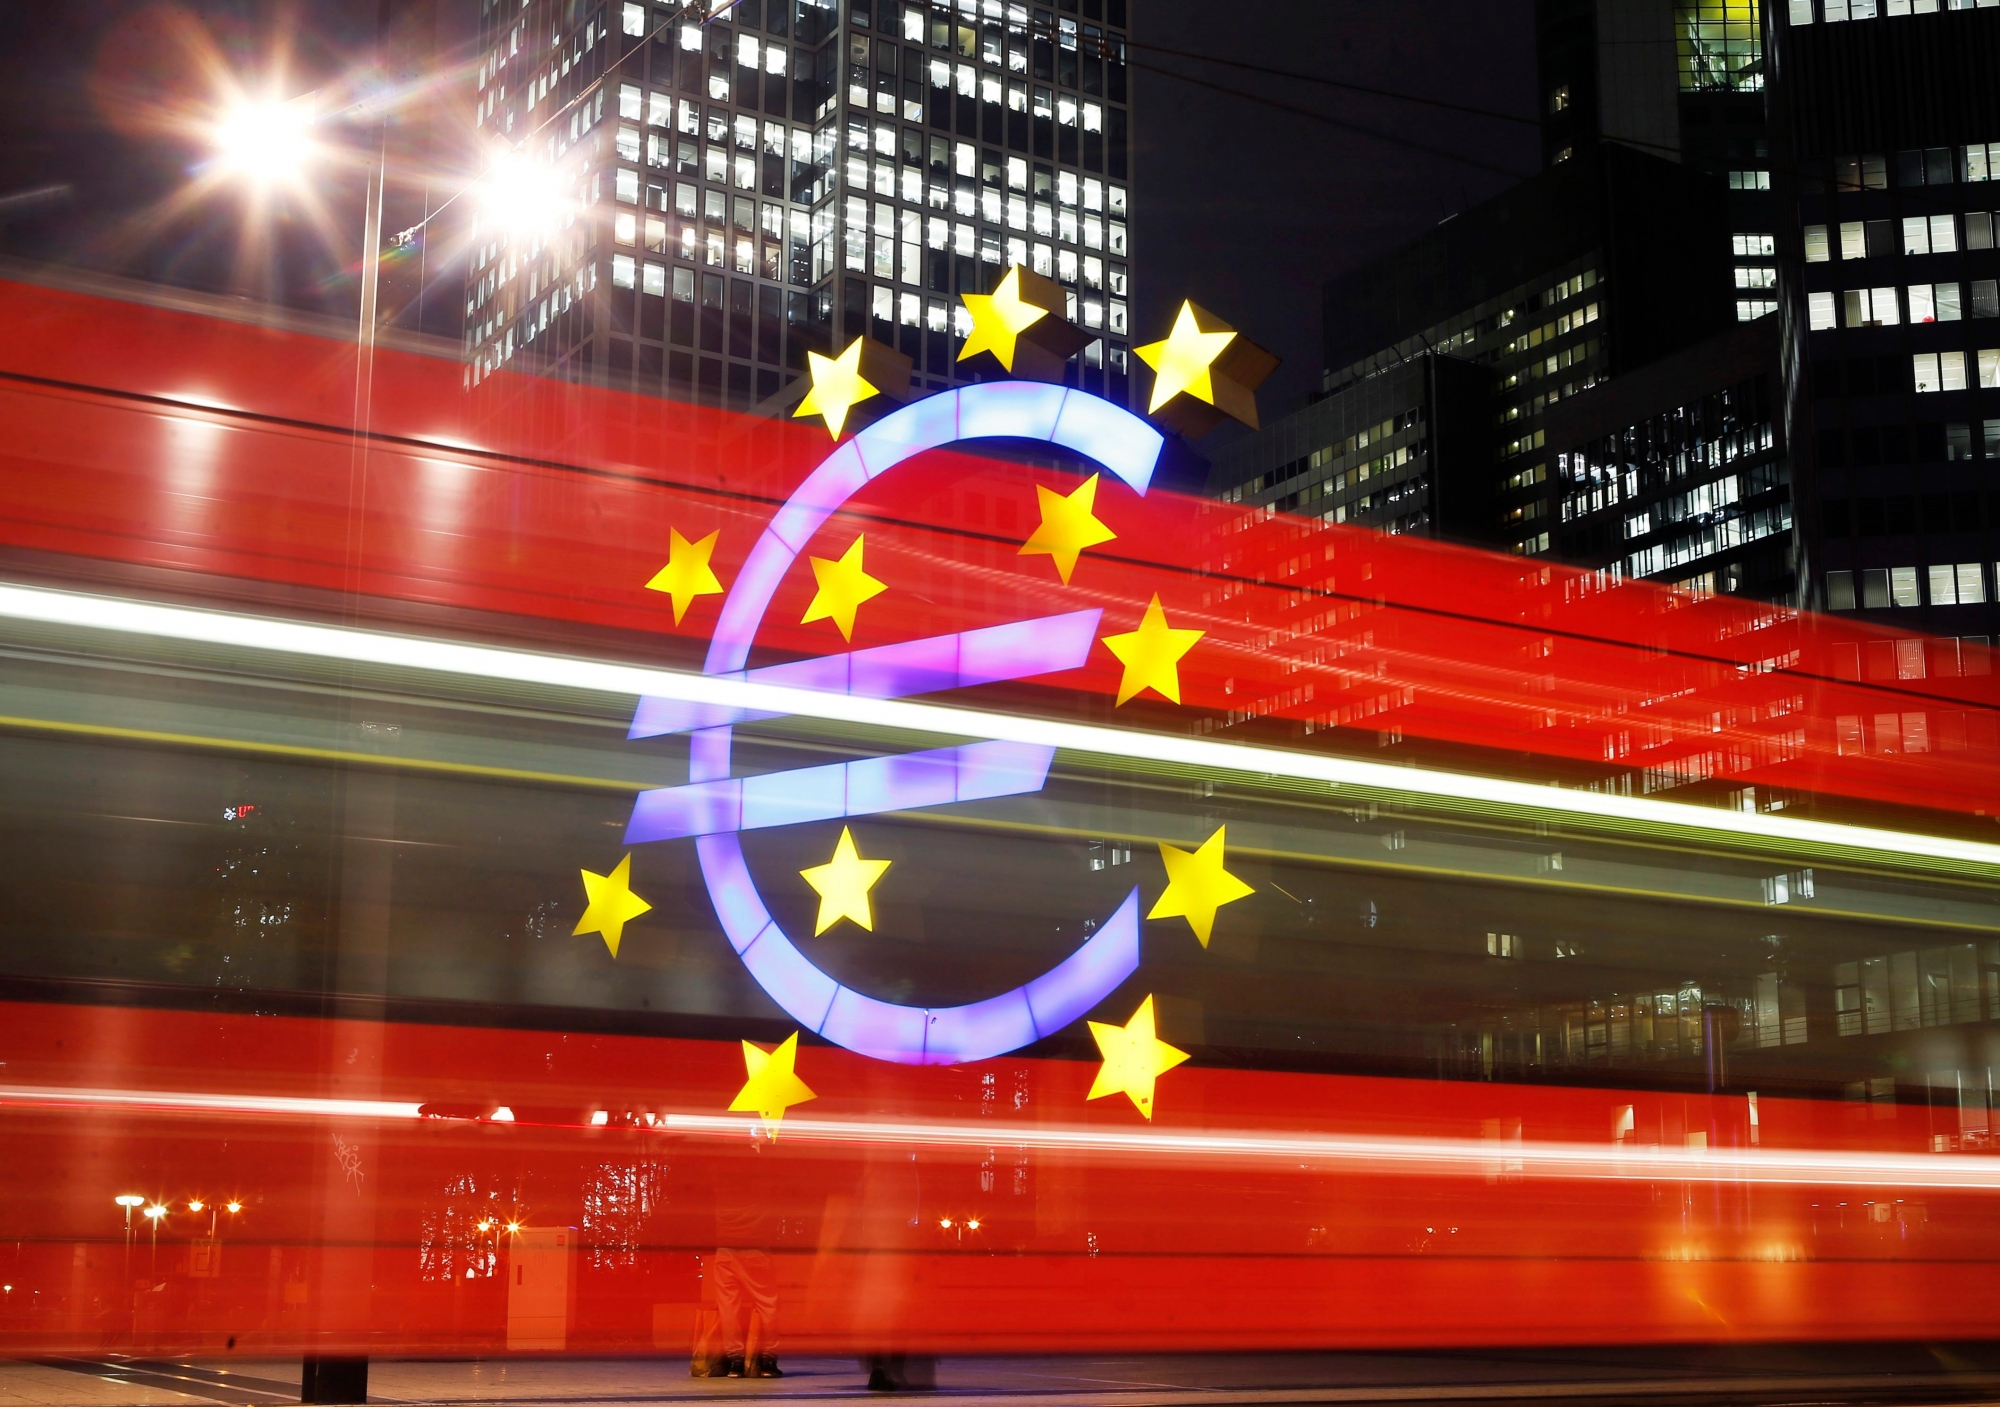 FILE - In this Monday, Oct. 27, 2014 file photo taken with long time exposure, shows a tram passing by the Euro sculpture in front of the European Central Bank in Frankfurt, Germany. Europe's experiment with sharing a currency is turning 20 in a few days. The euro is credited with increasing trade between members. But countries have struggled to adjust to trouble after giving up two big safety valves: the ability to let their currency's exchange rate fall to boost exports, and to adjust own interest rates to stimulate business activity. (AP Photo/Michael Probst, File) EU The Euro at 20